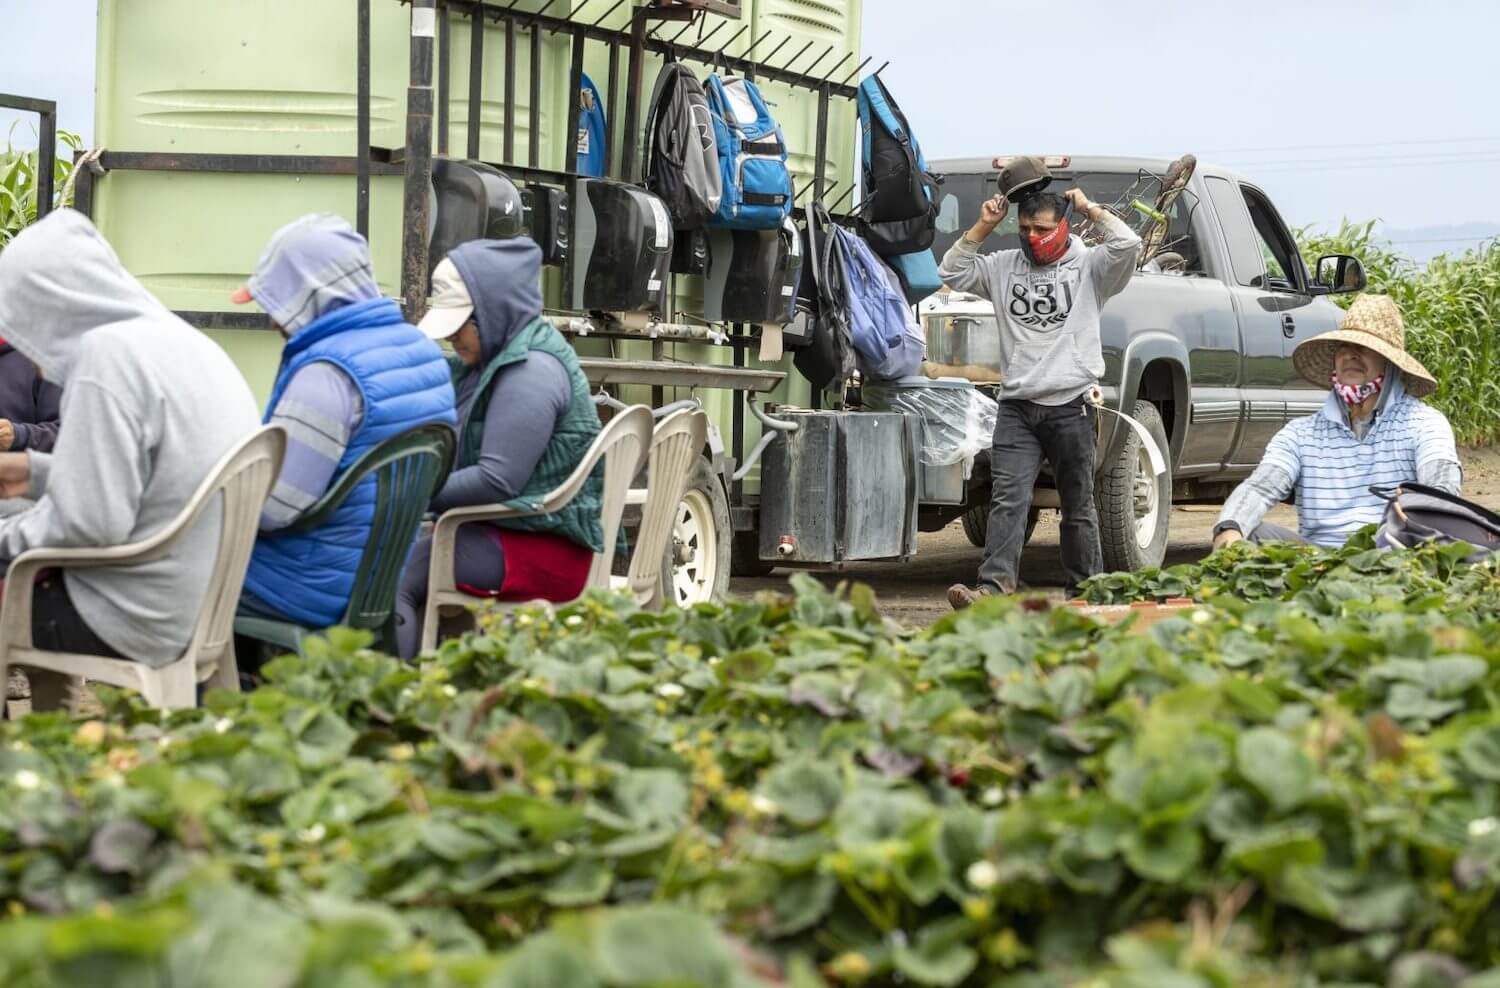 Farmworkers sit down for lunch break from picking strawberries in Watsonville, California. January 2021